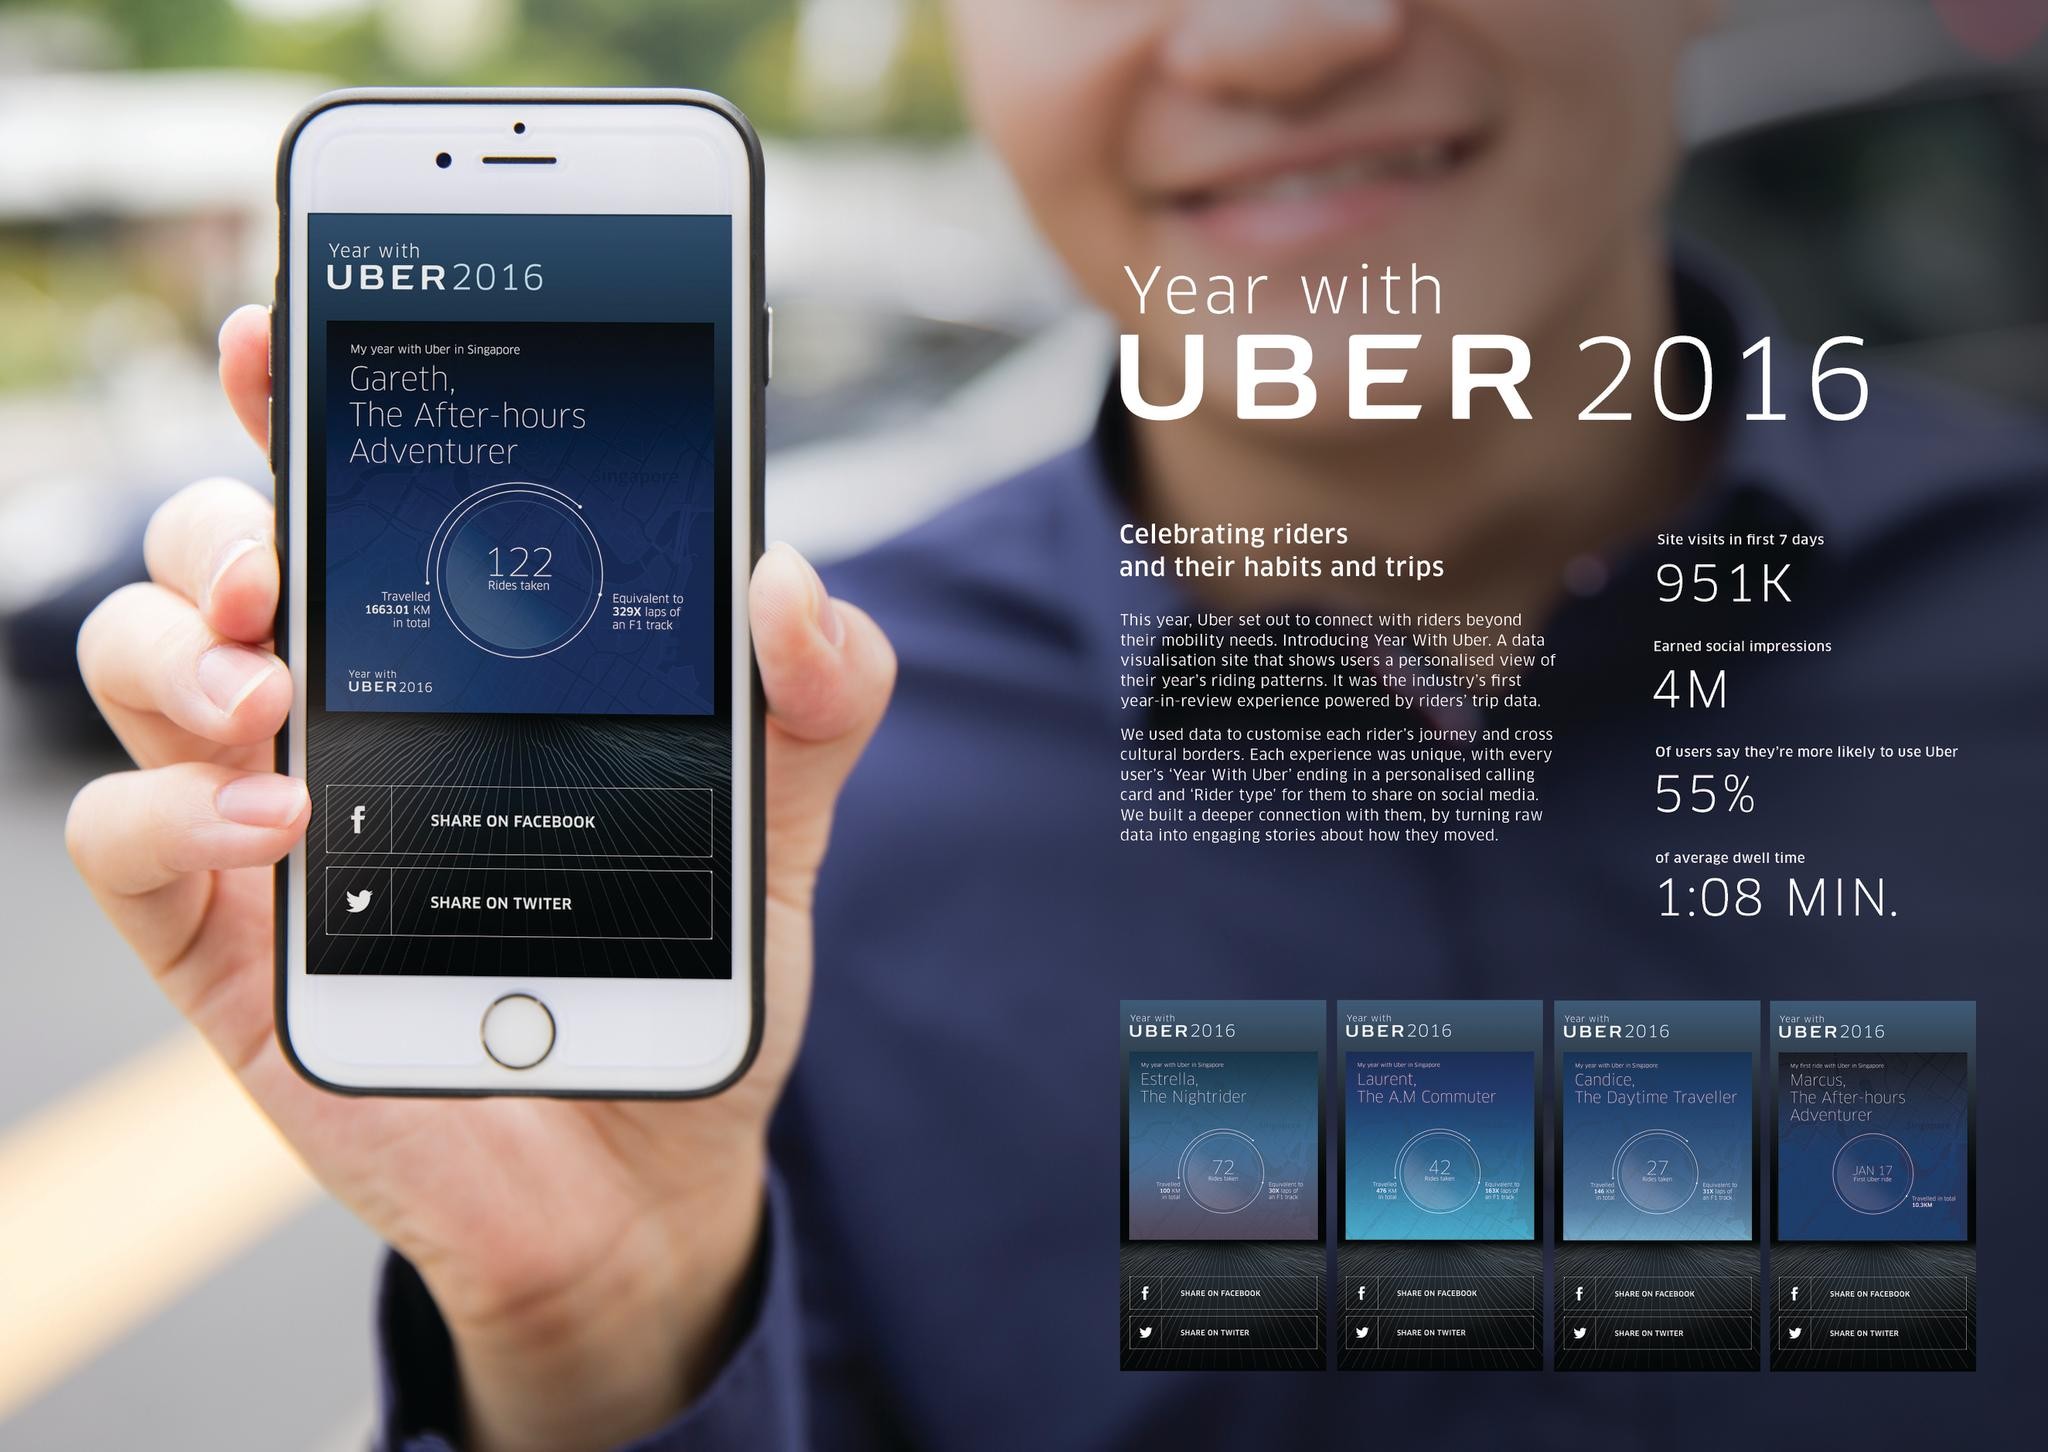 Year with Uber 2016